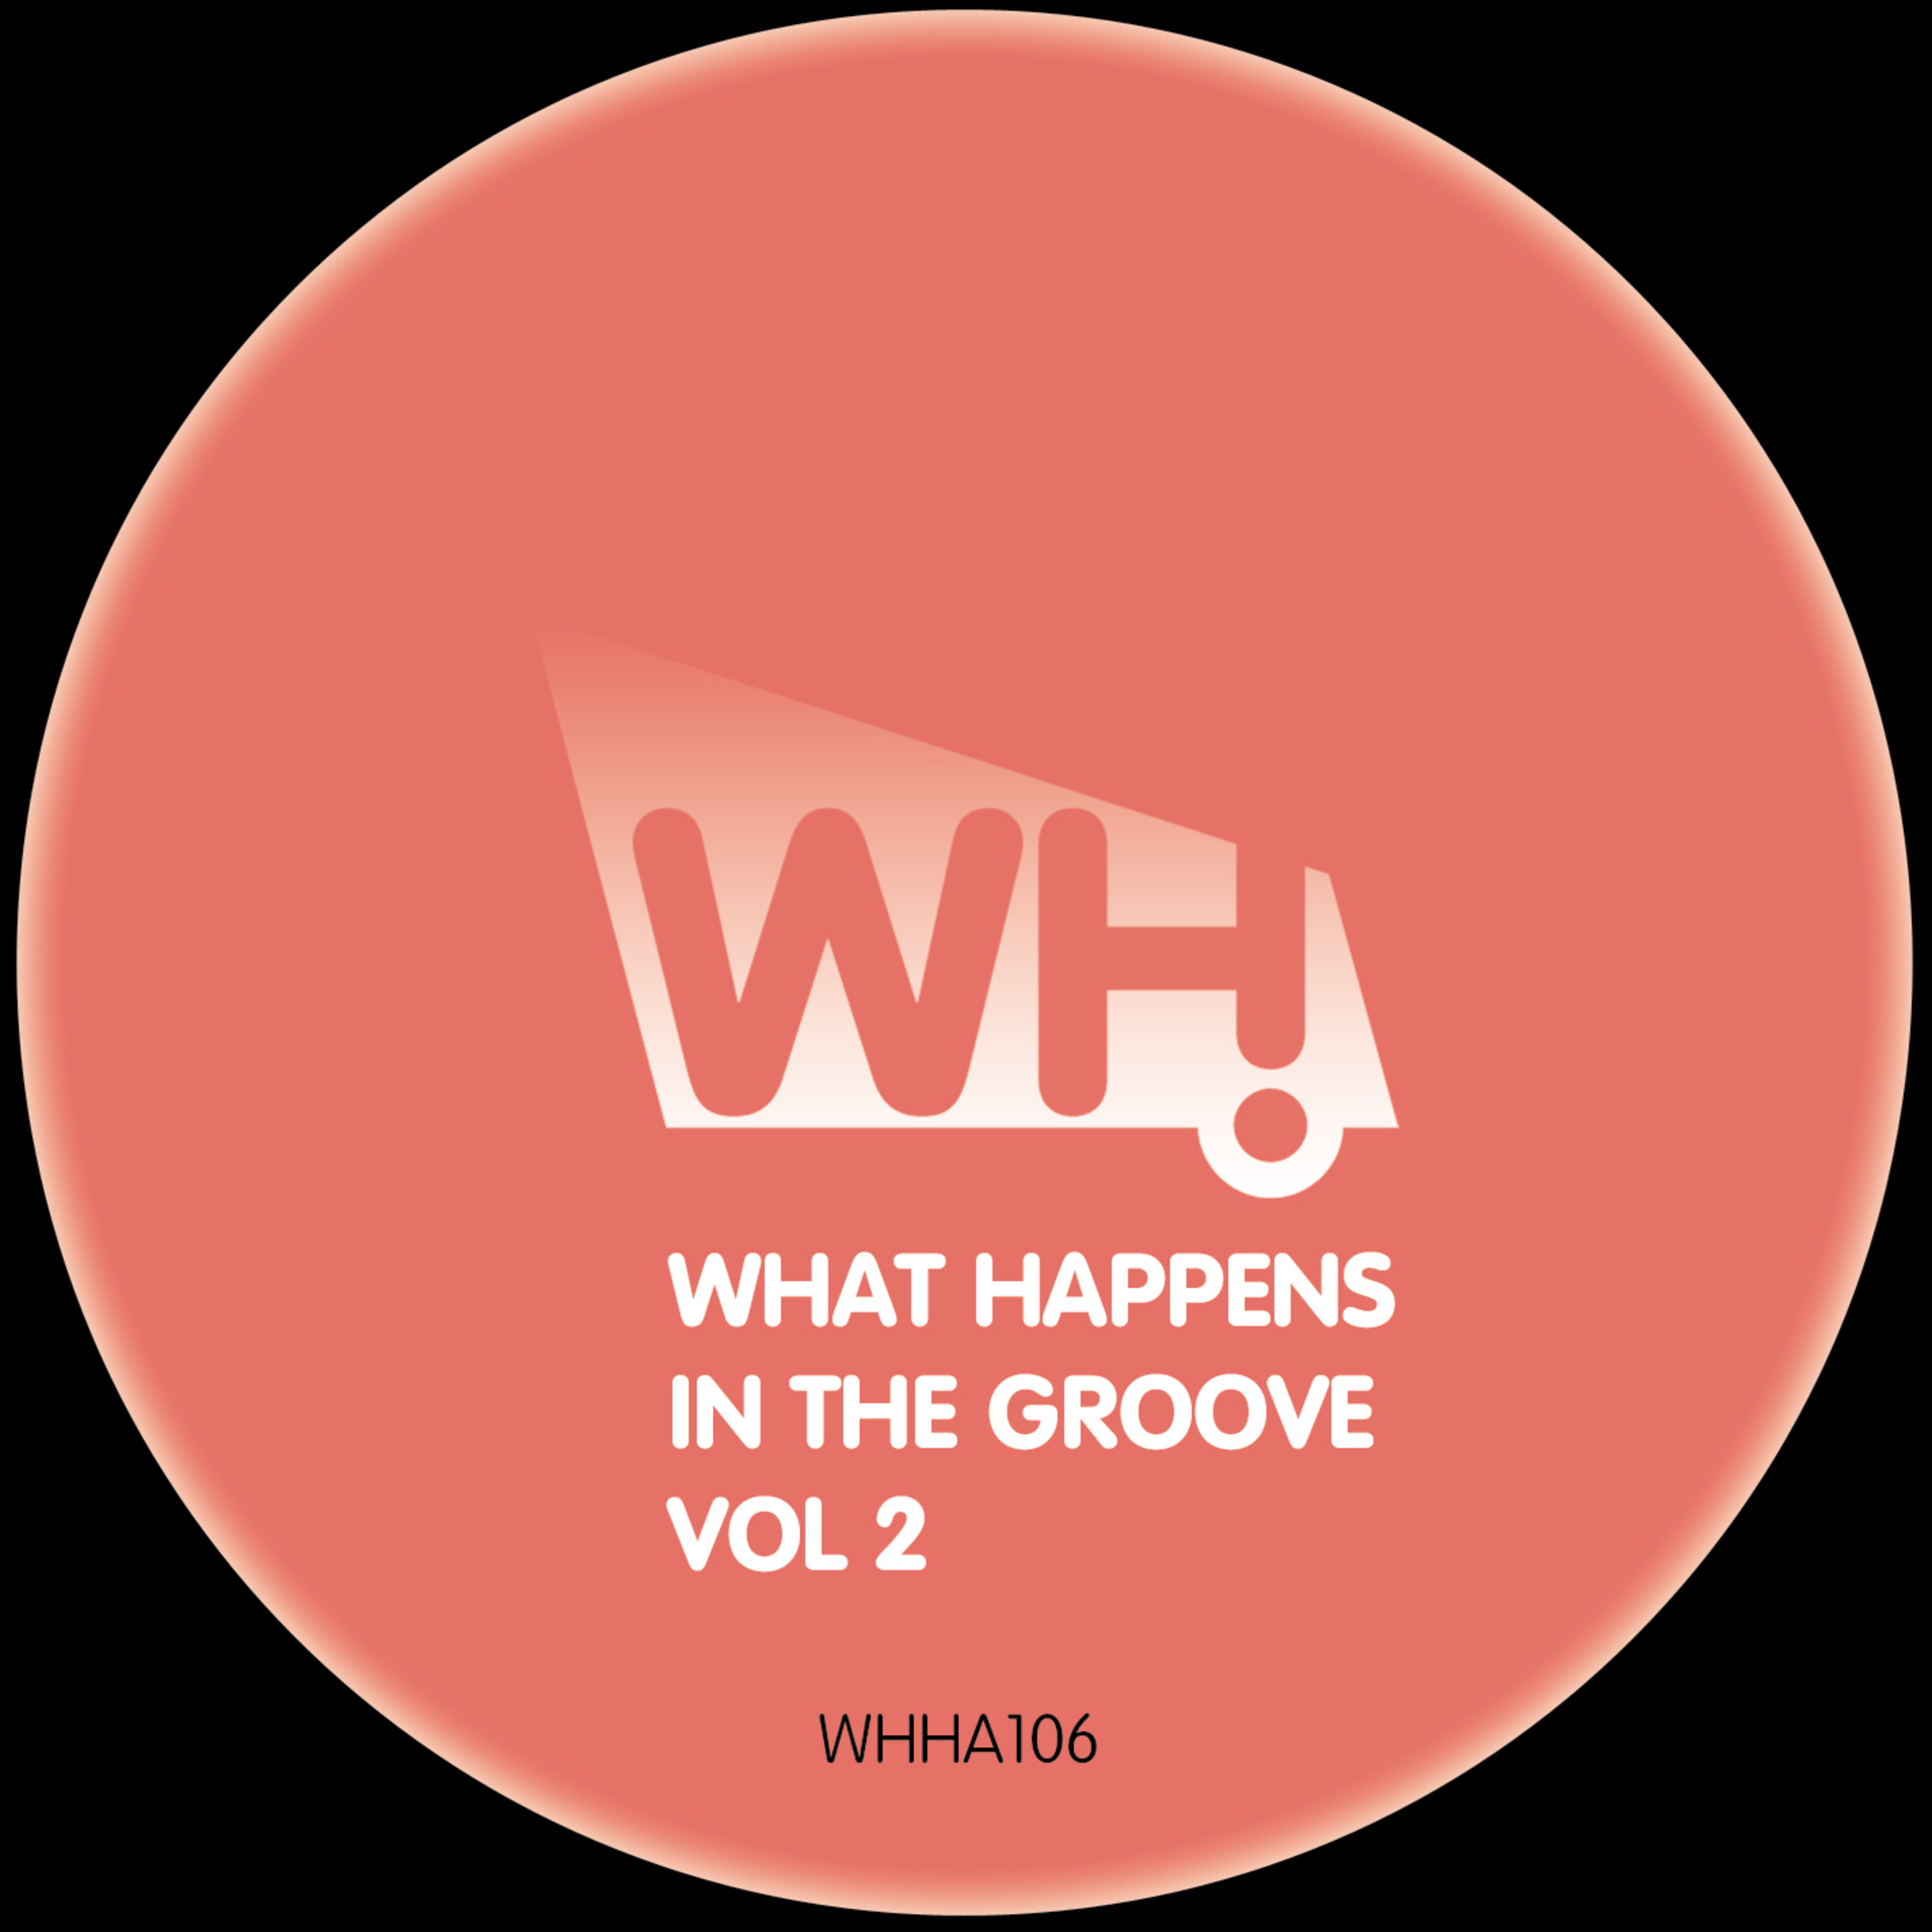 What Happens in the Groove Vol. 2